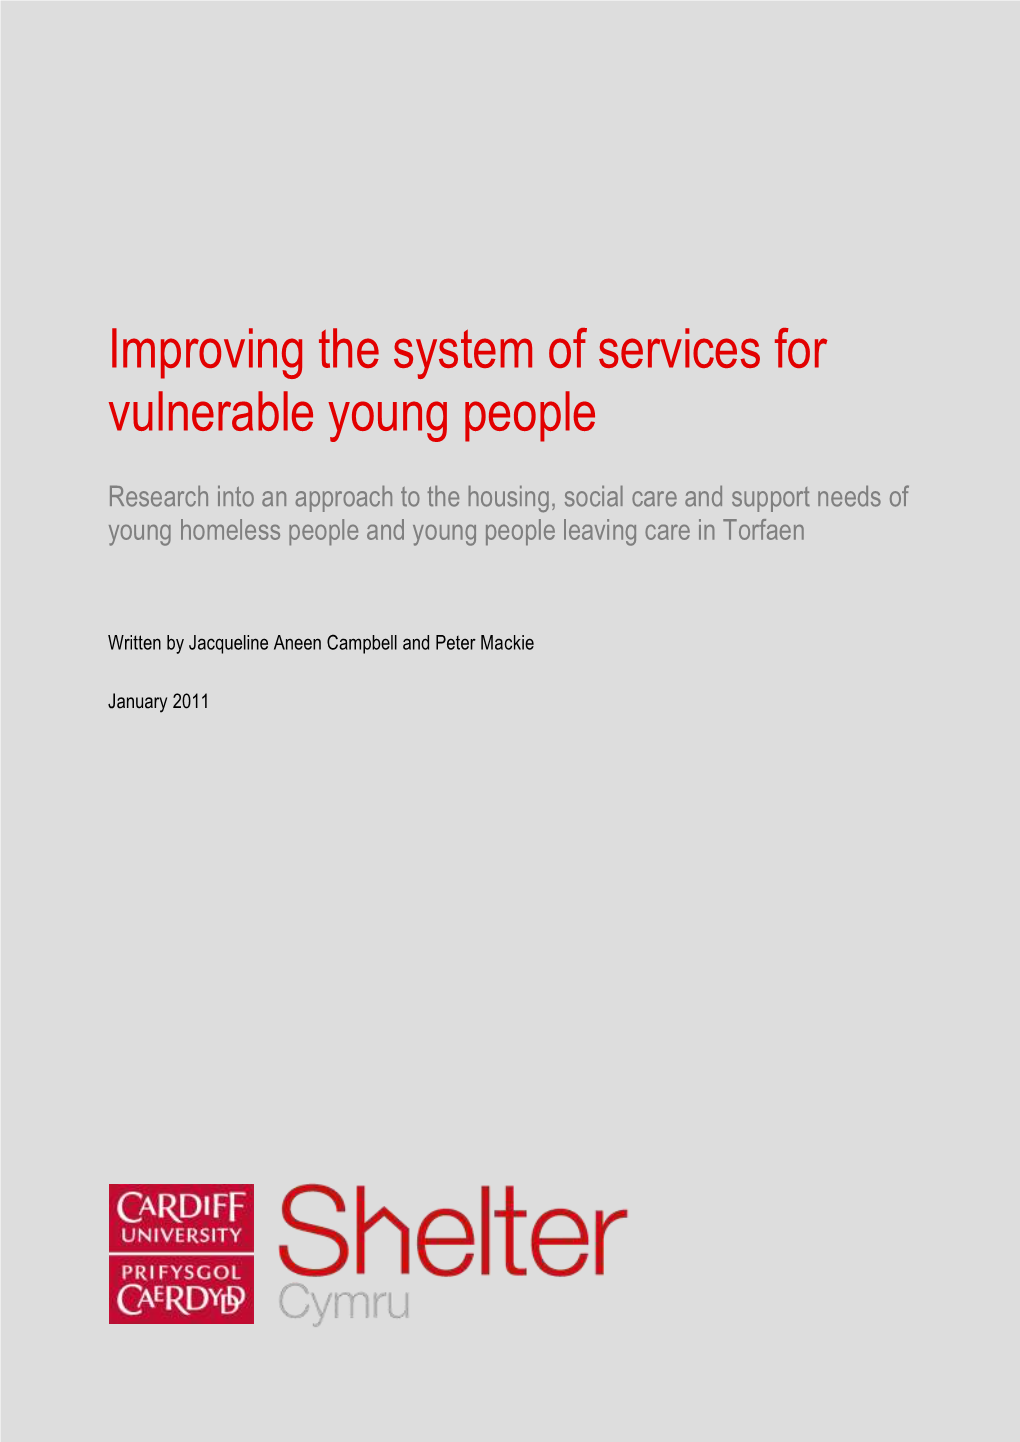 Improving the System of Services for Vulnerable Young People